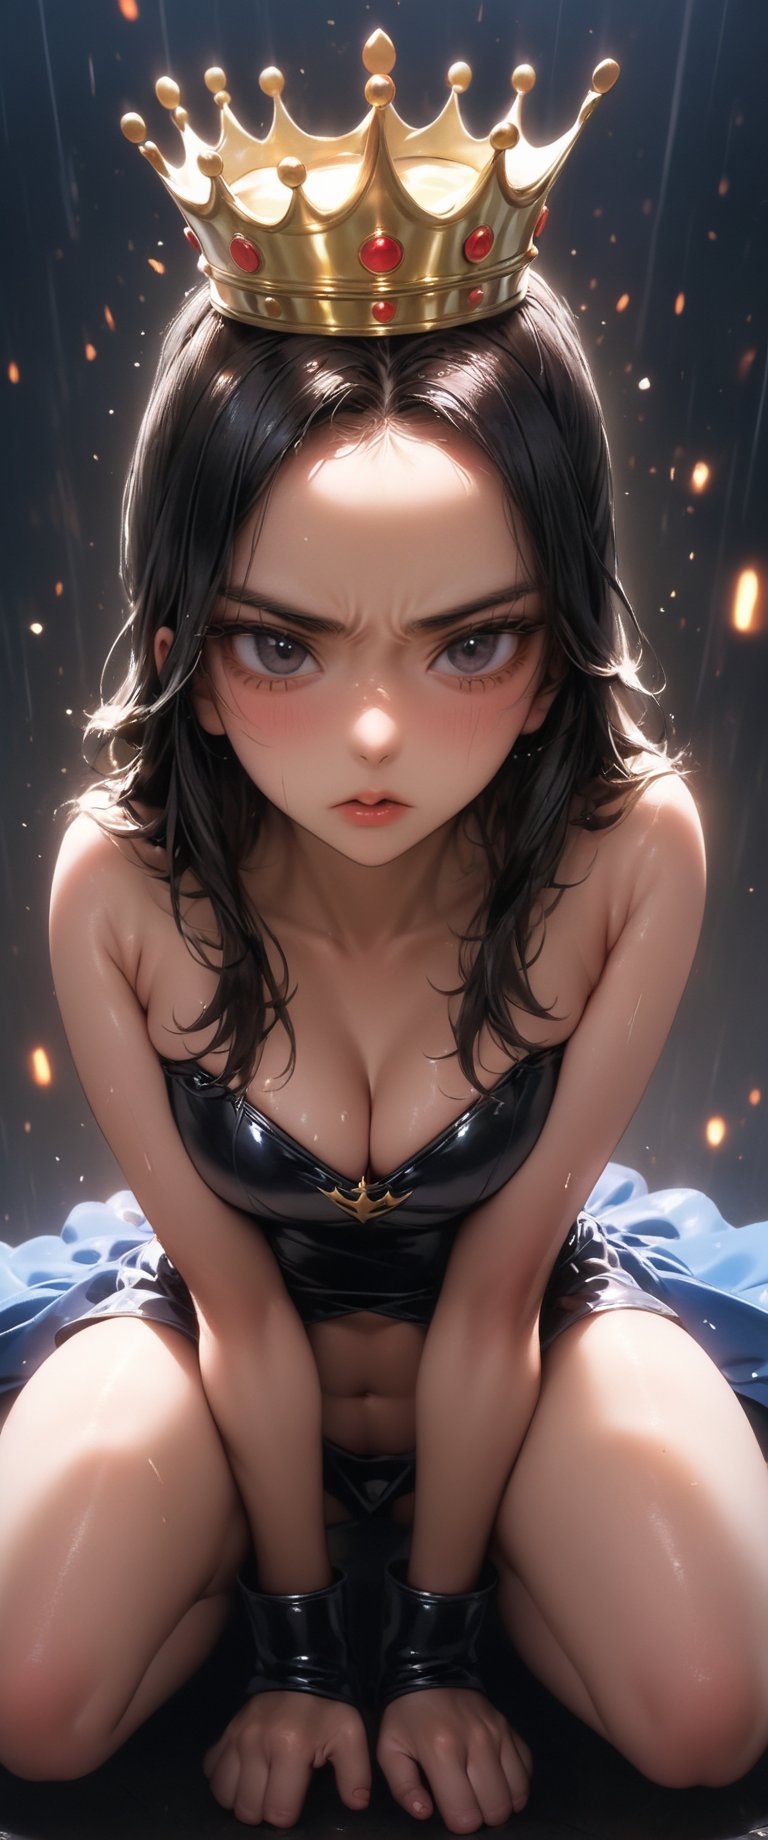 poster of a sexy   [princess, suffering,  burdened by the weight of a crown,  ]  in a  [ ], pissed_off,angry, latex uniform, eye angle view, ,dark anim,minsi,ct-niji2,sooyaaa,ct-niji3